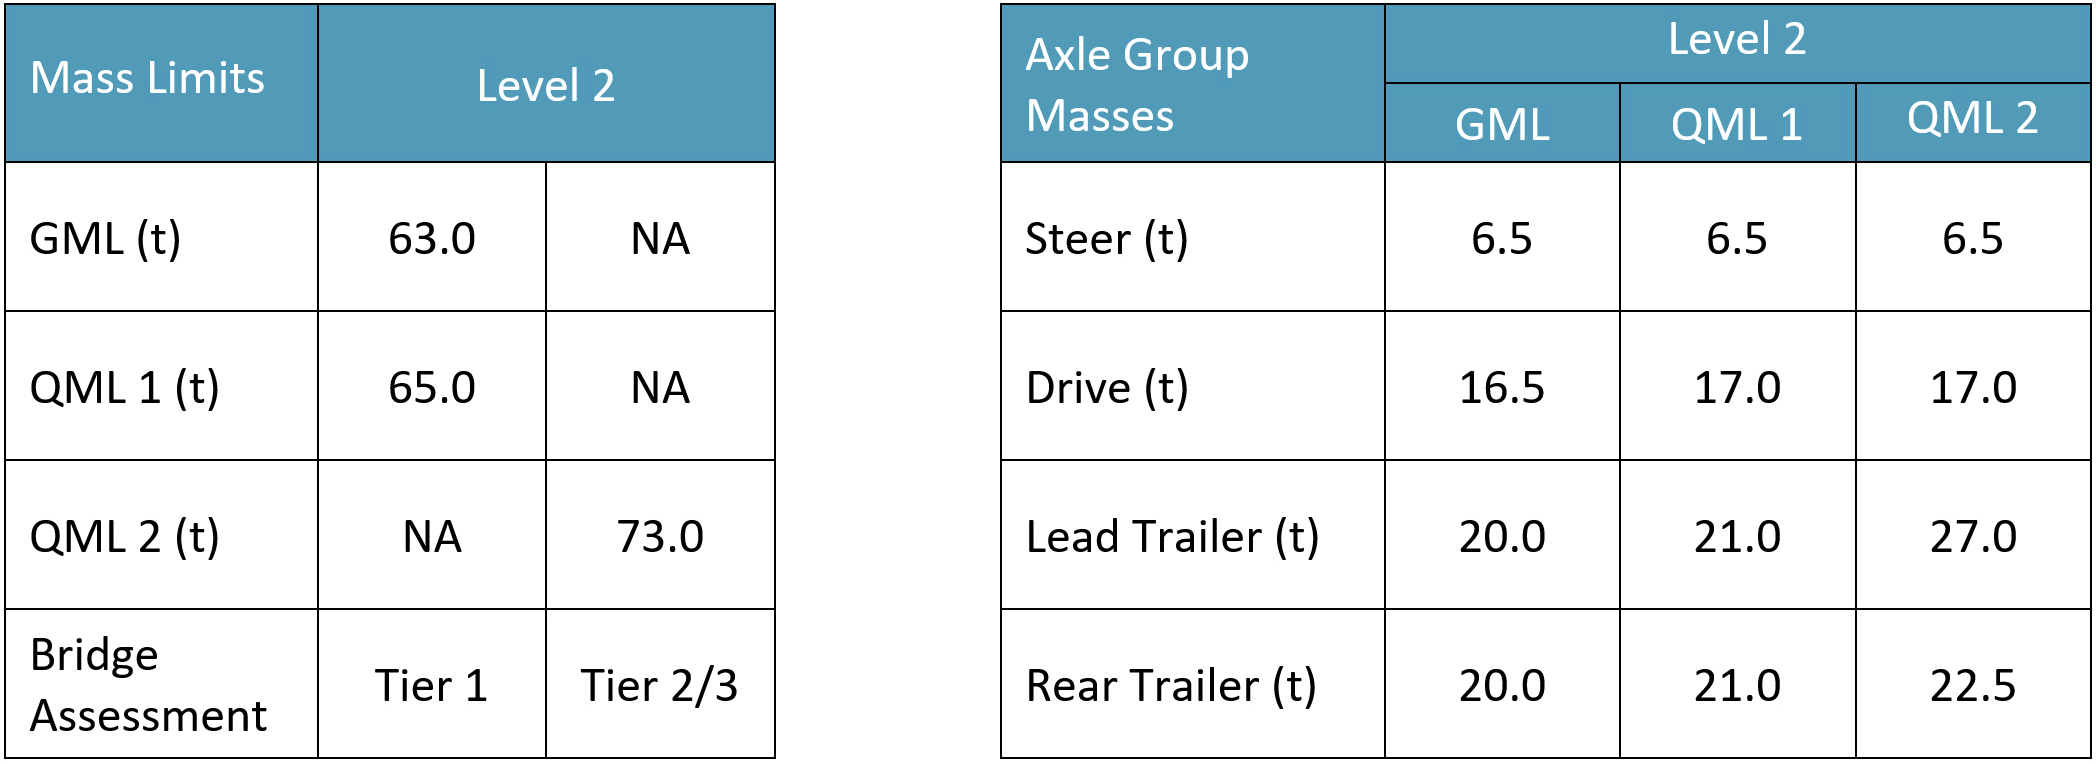 image is of an example of an excerpt from a VA or FA of a mass limits table and axle group breakdown.